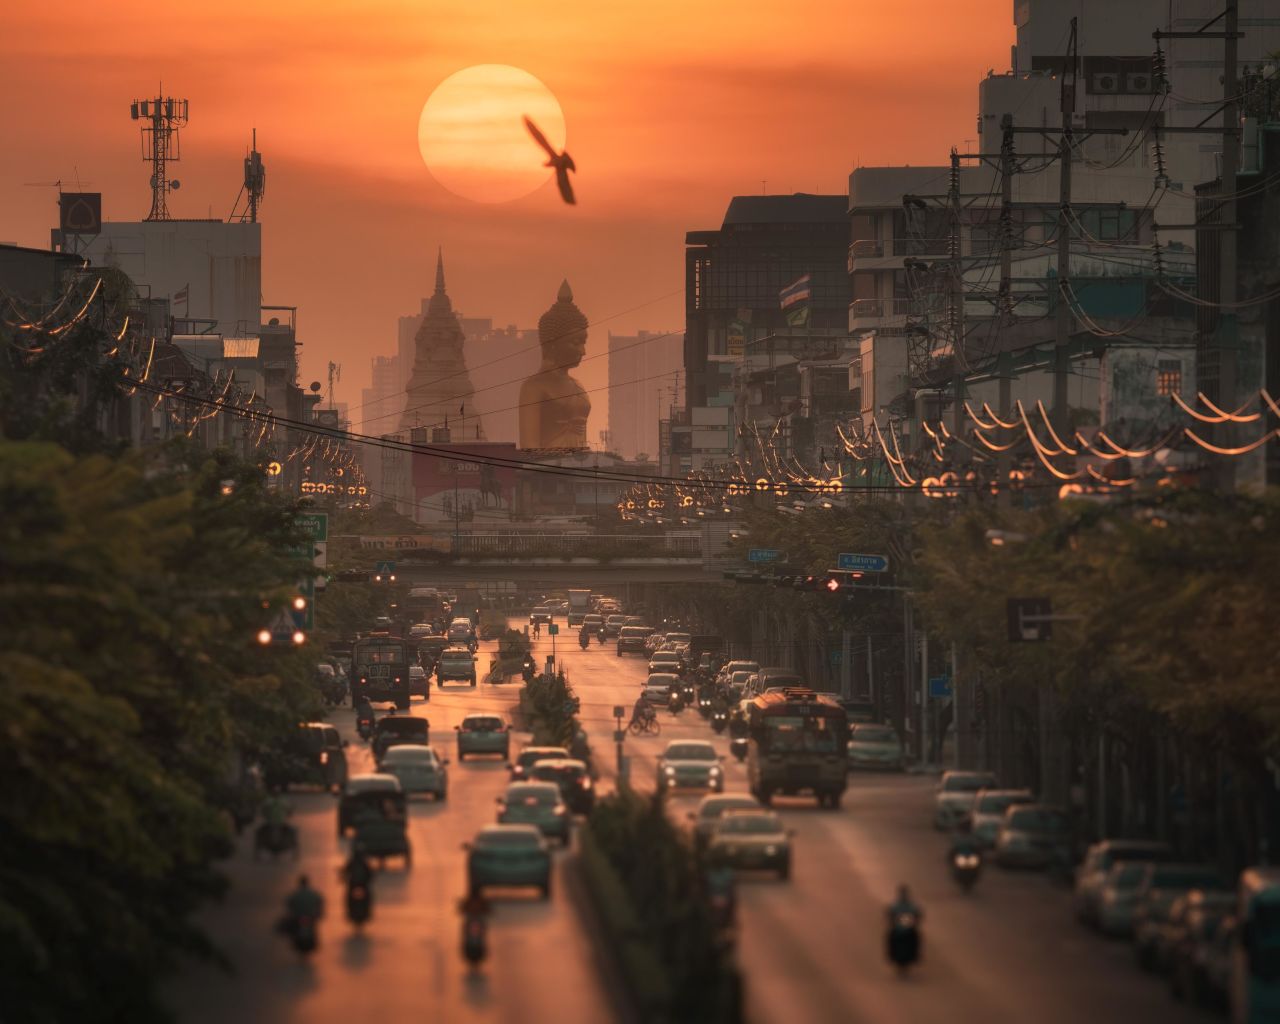 Photographer Kunuch Chutmongkolporn uses the Big Buddha statue in Bangkok, Thailand, as a backdrop for his image "Big Statue in the Middle of the City."